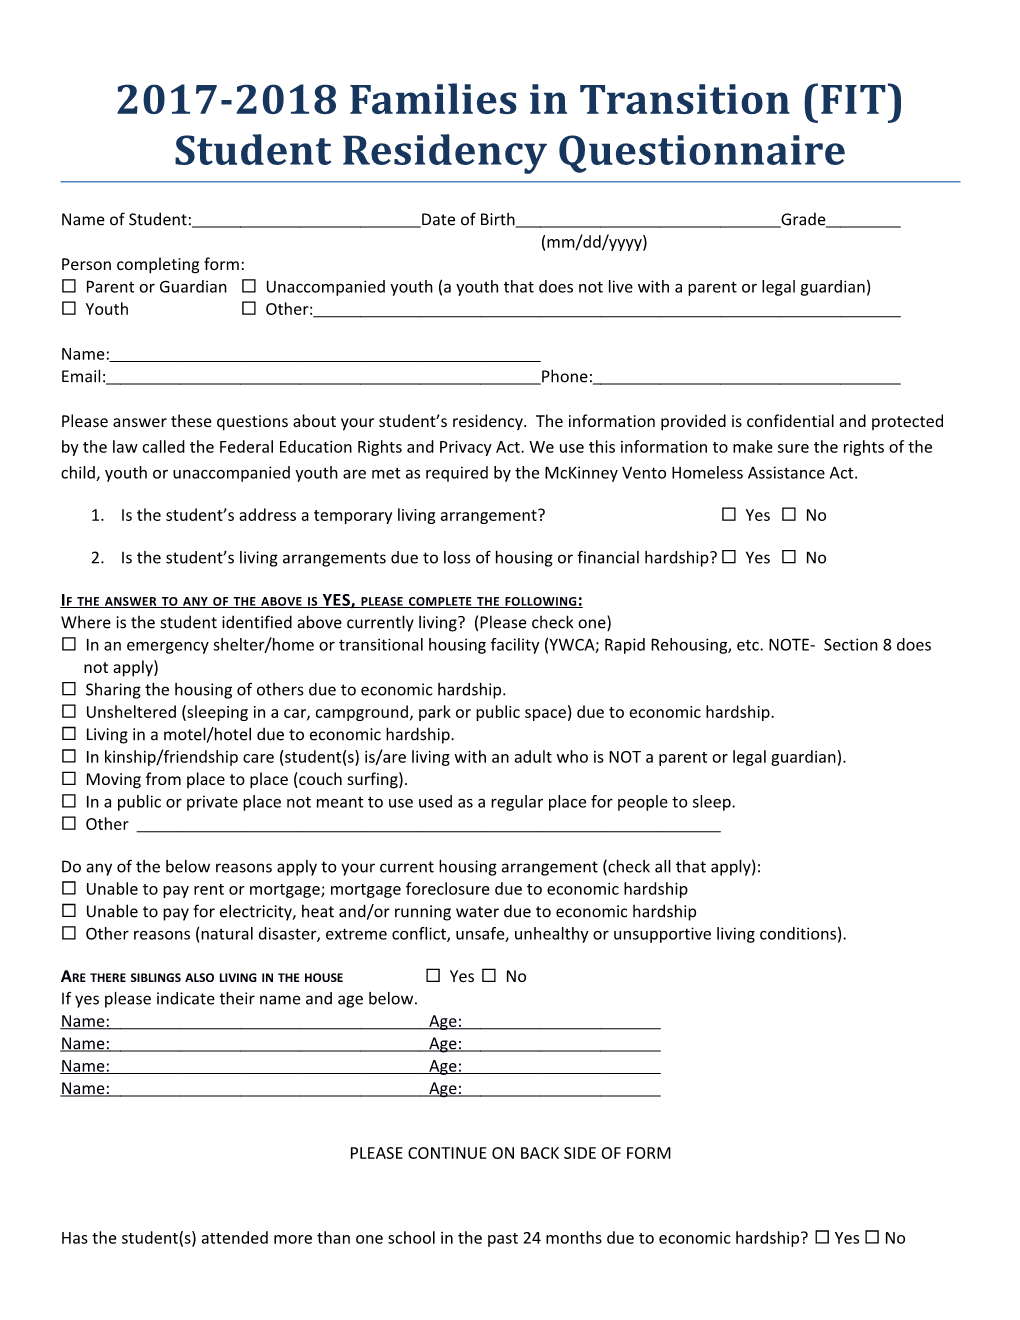 2017-2018 Families in Transition (FIT) Student Residency Questionnaire